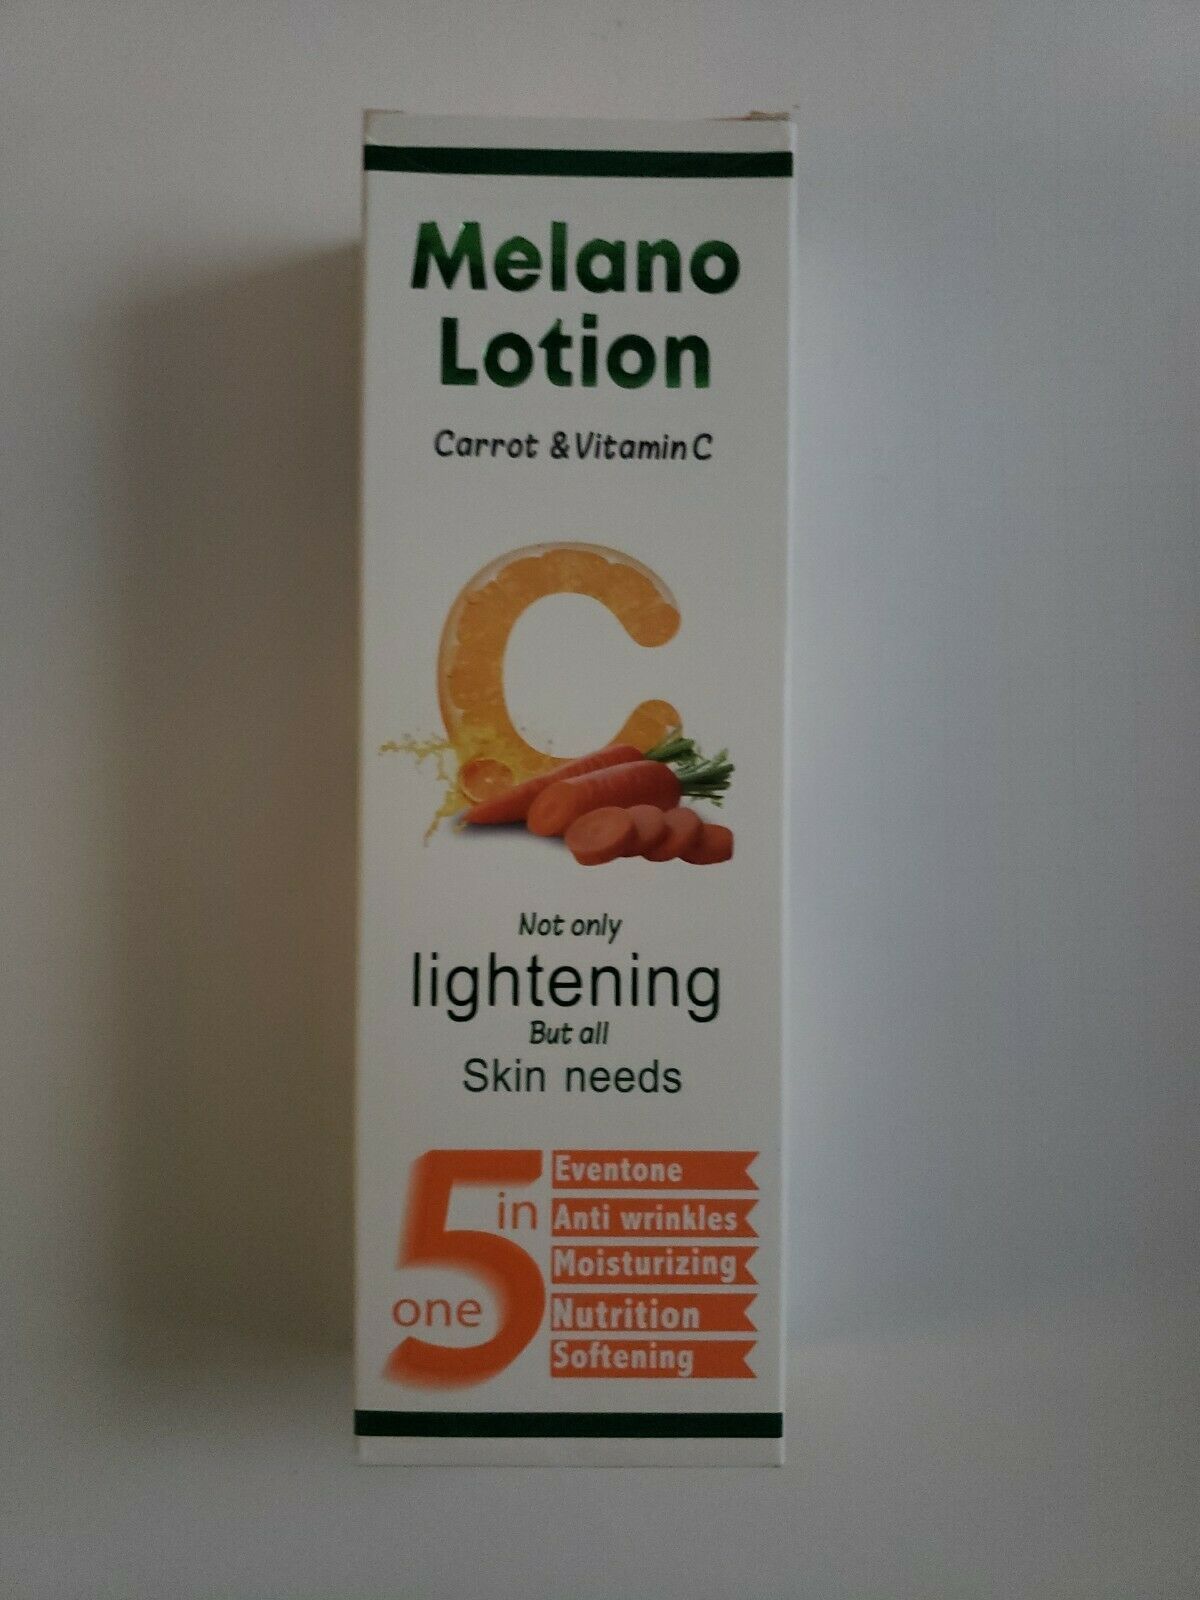 melano carrot and vitamin c body lotion.300ml.for all skin needs